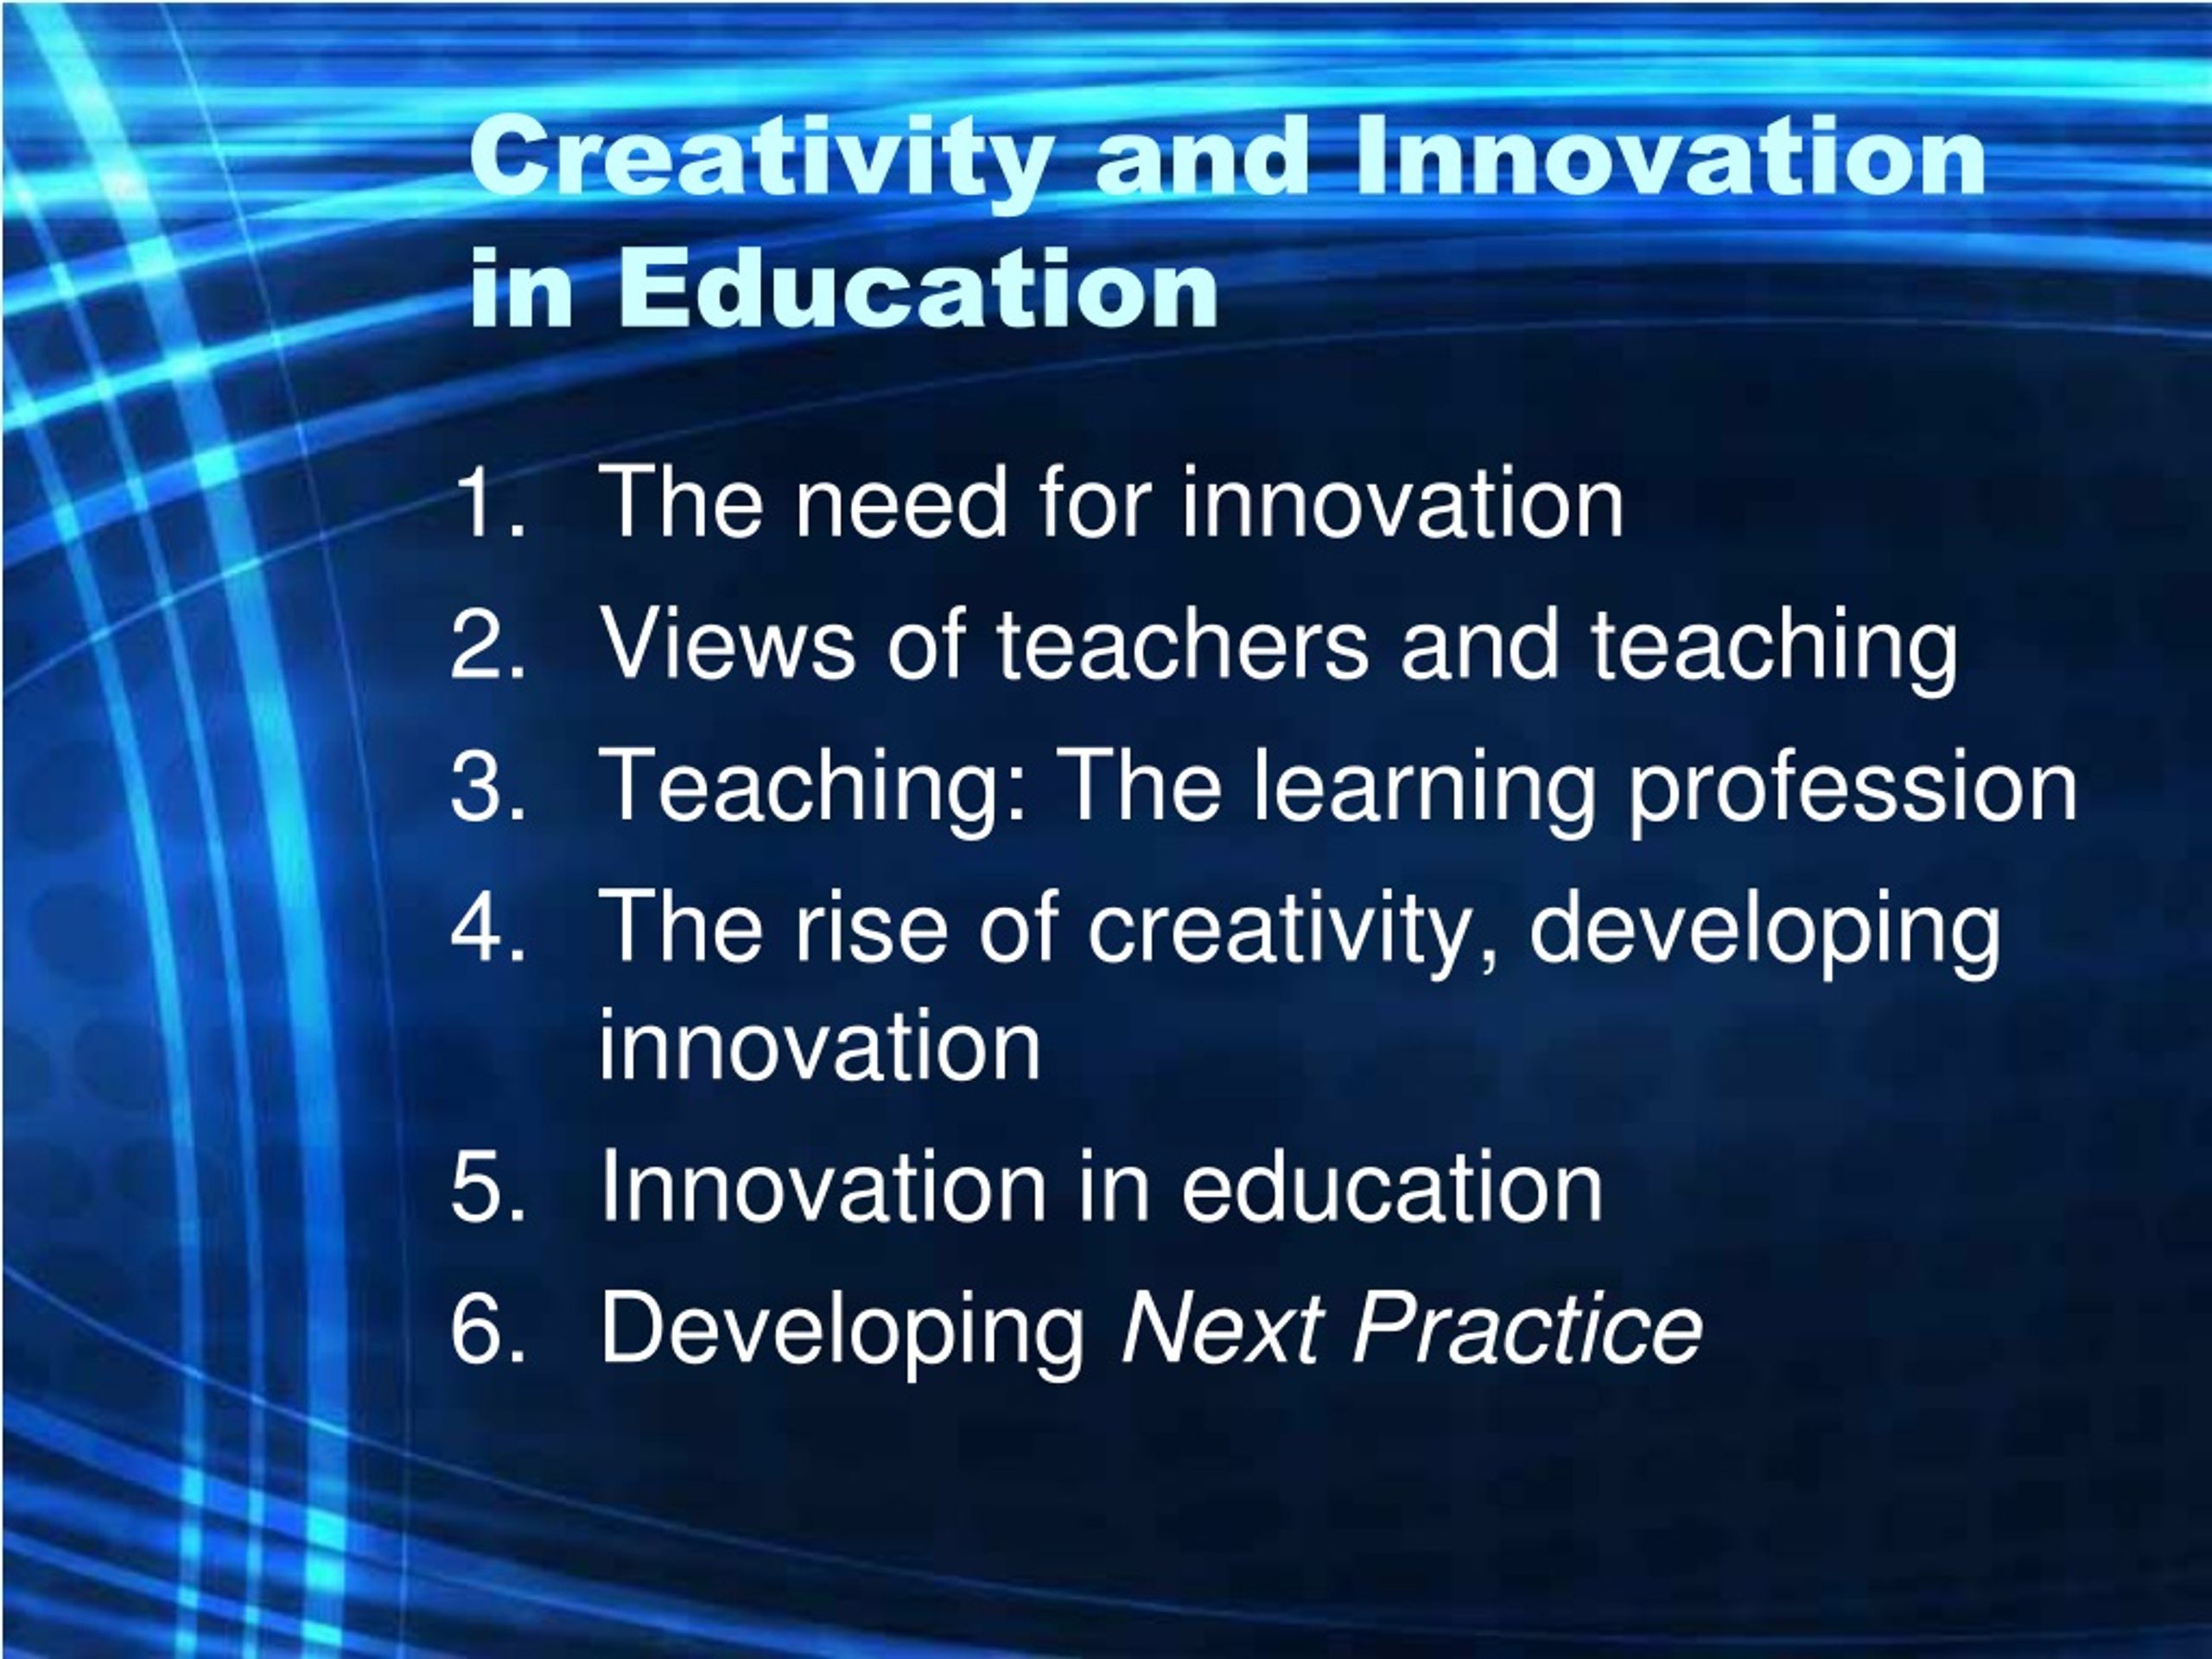 creativity and innovation in education ppt